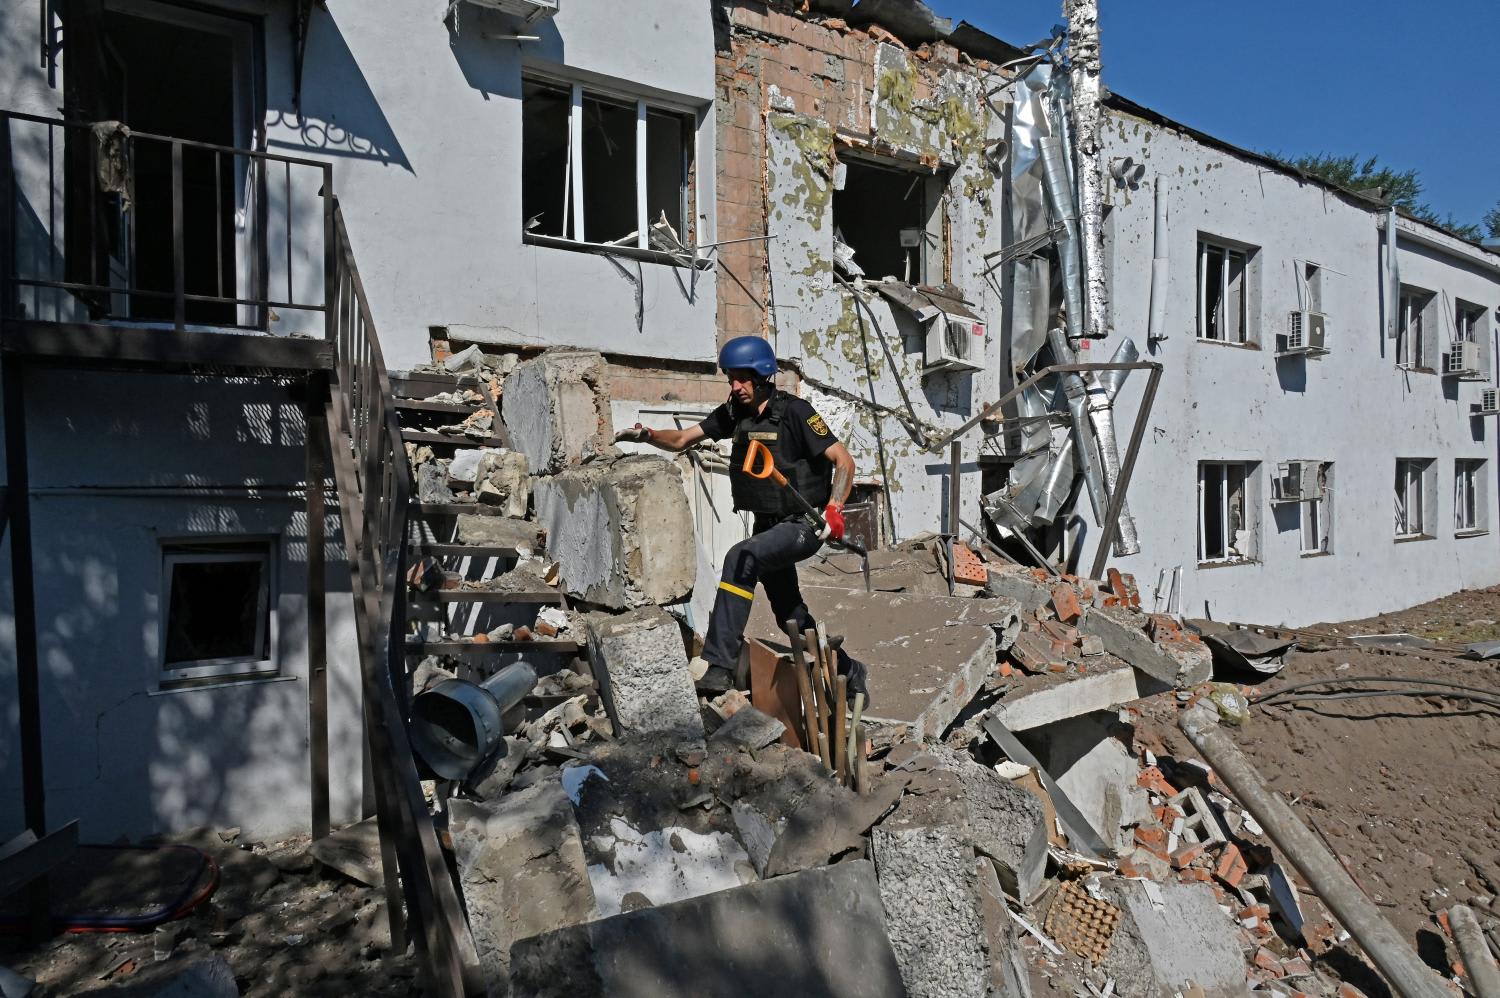 A Ukrainian deminer climb debris near the damaged building of a clinical medical laboratory following a Russian rocket strike in the second largest Ukrainian city of Kharkiv on Aug 9, 2022.